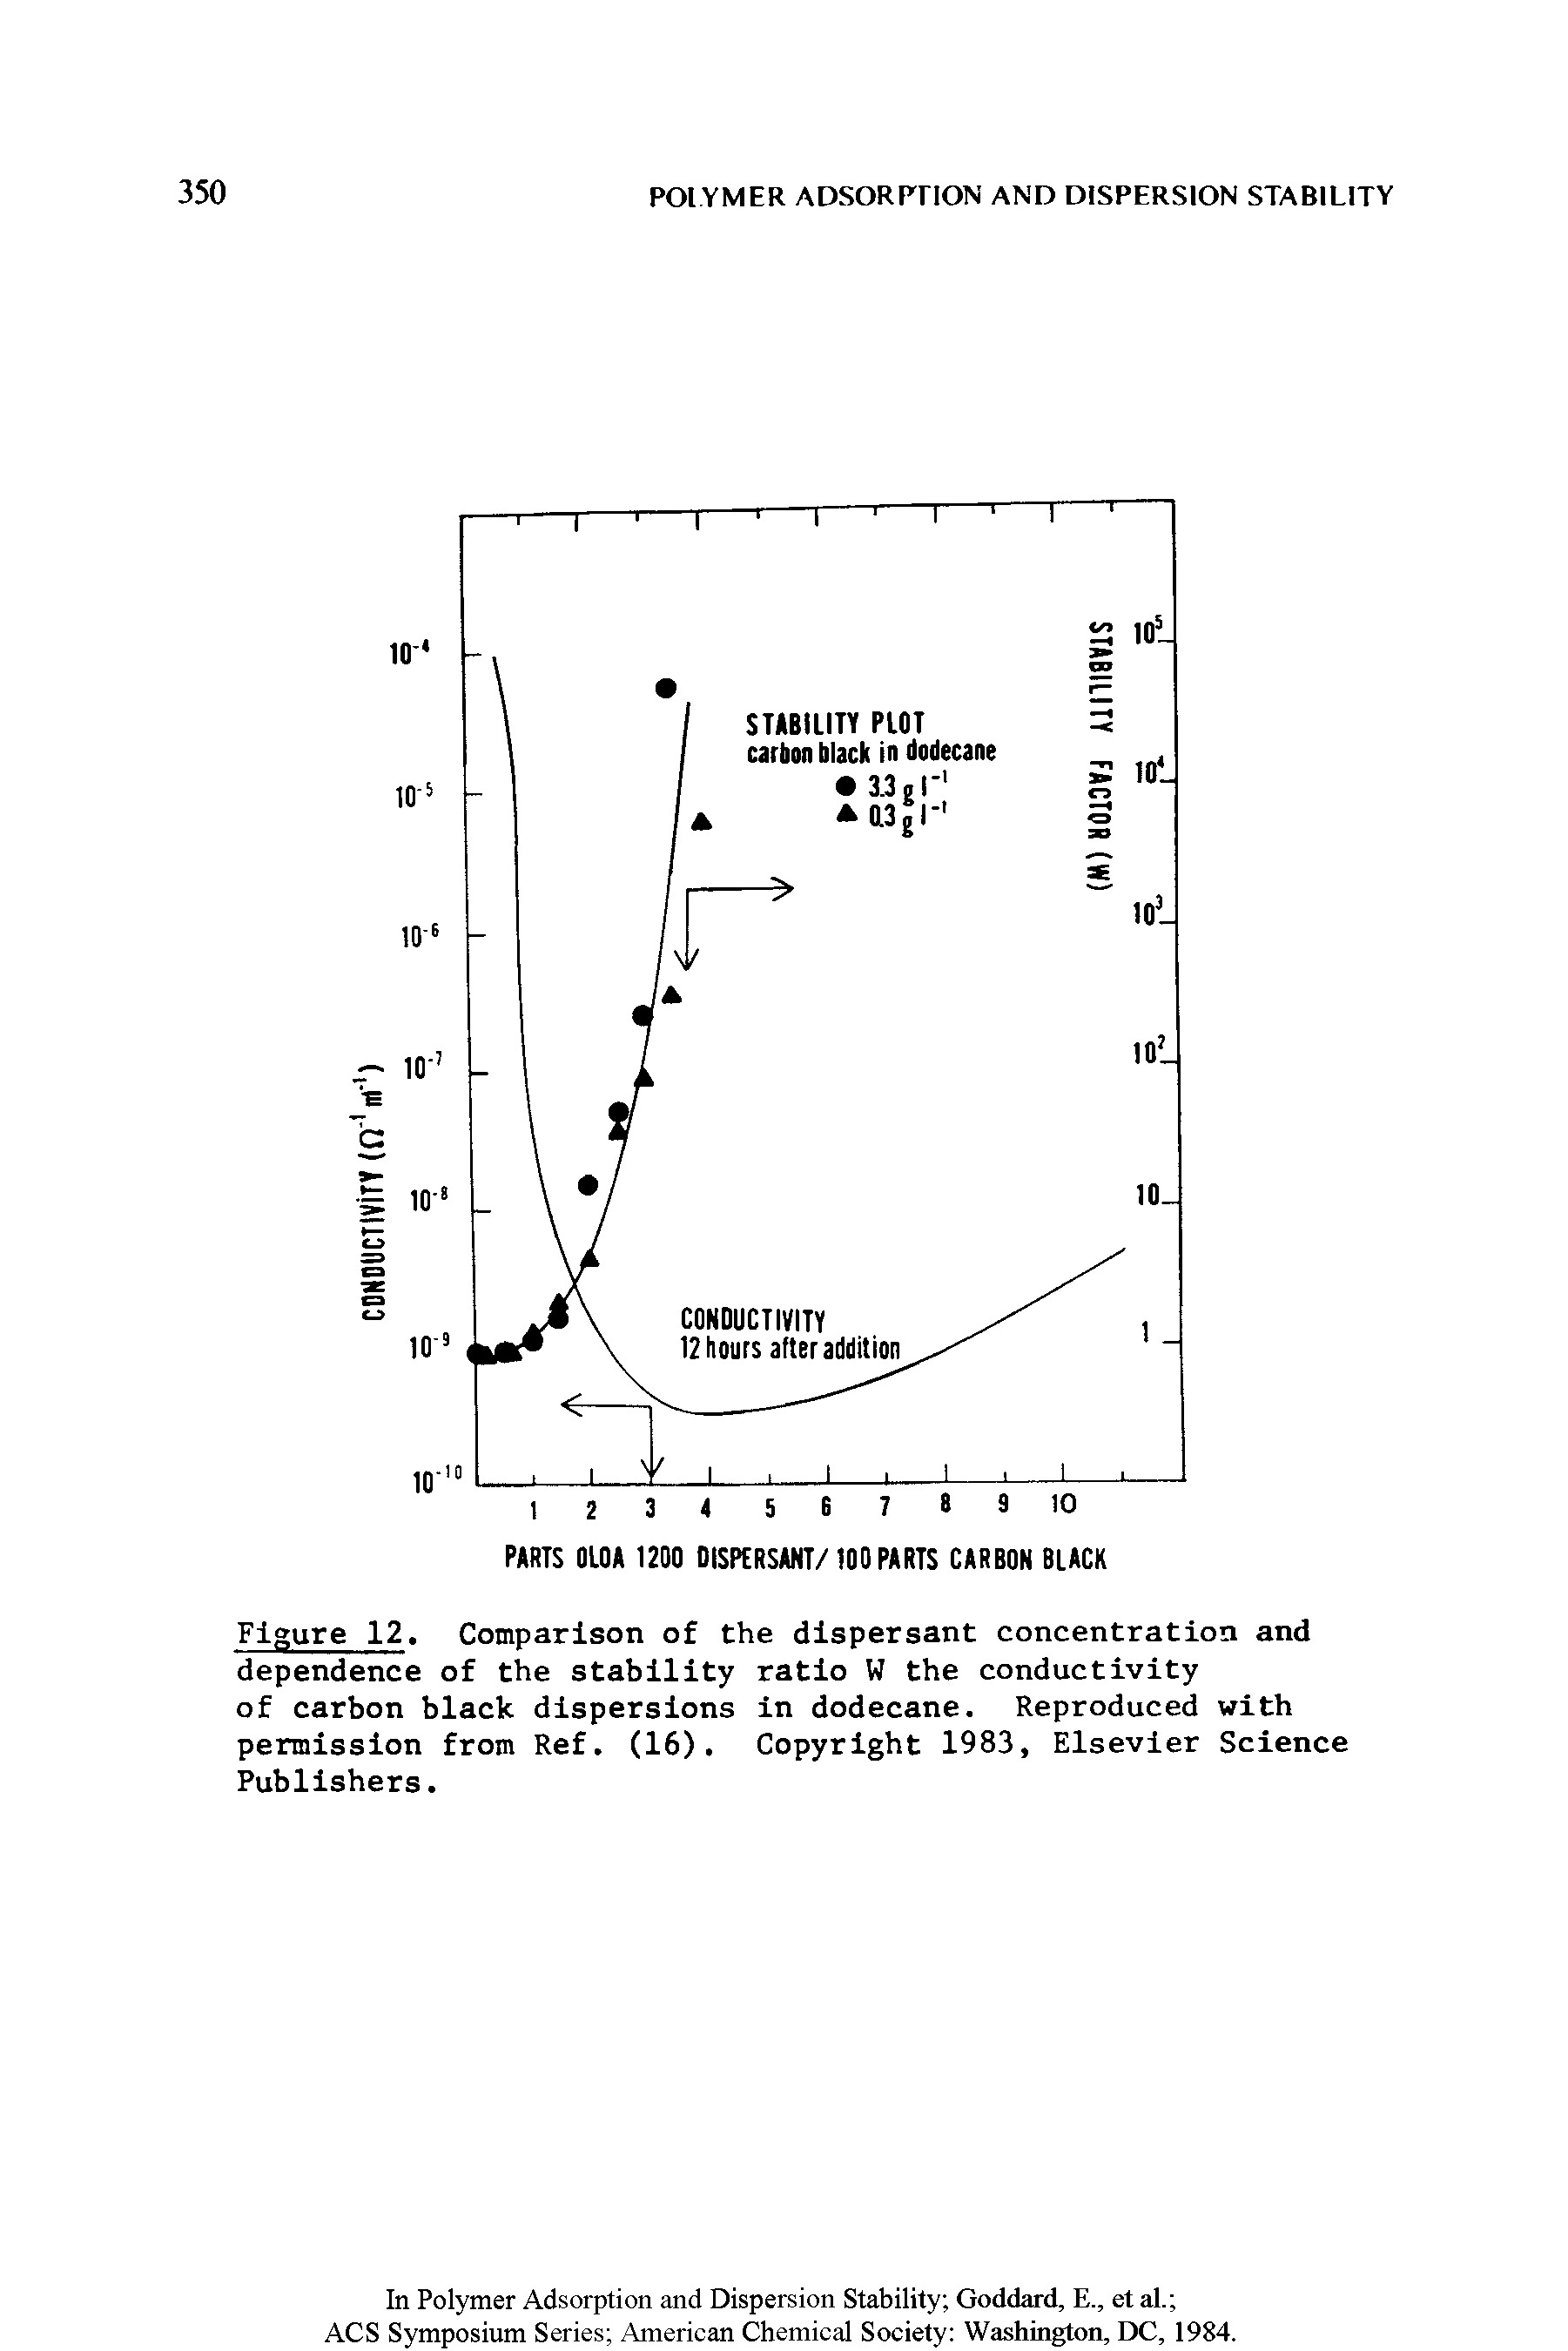 Figure 12. Comparison of the dispersant concentration and dependence of the stability ratio W the conductivity of carbon black dispersions in dodecane. Reproduced with permission from Ref. (16). Copyright 1983, Elsevier Science Publishers.